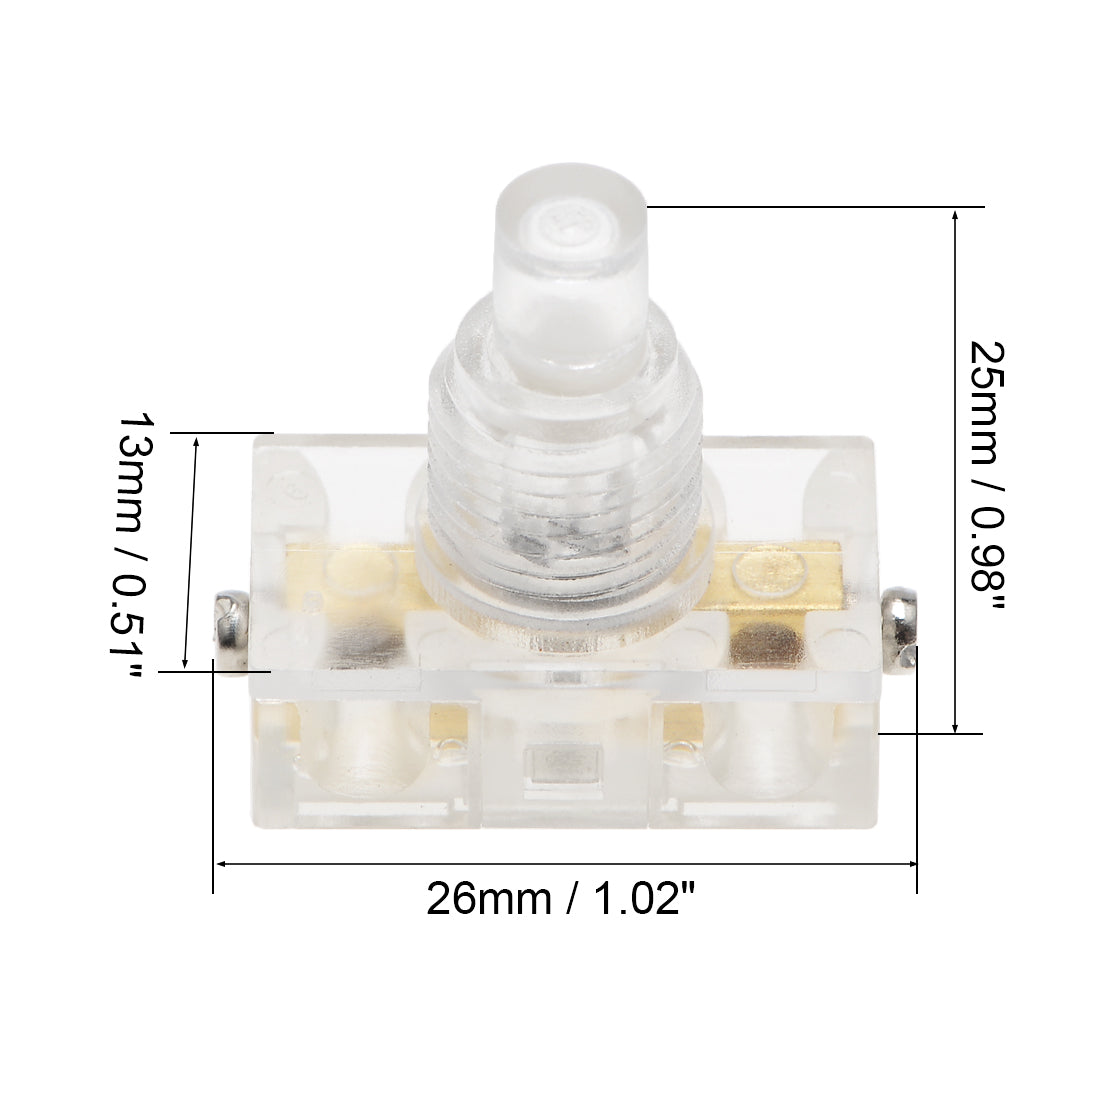 Uxcell Uxcell Inline Foot Pedal Push Button Switch, UFO Type Lamp Lighting Foot Control Latching ON/Off Footswitch Transparent